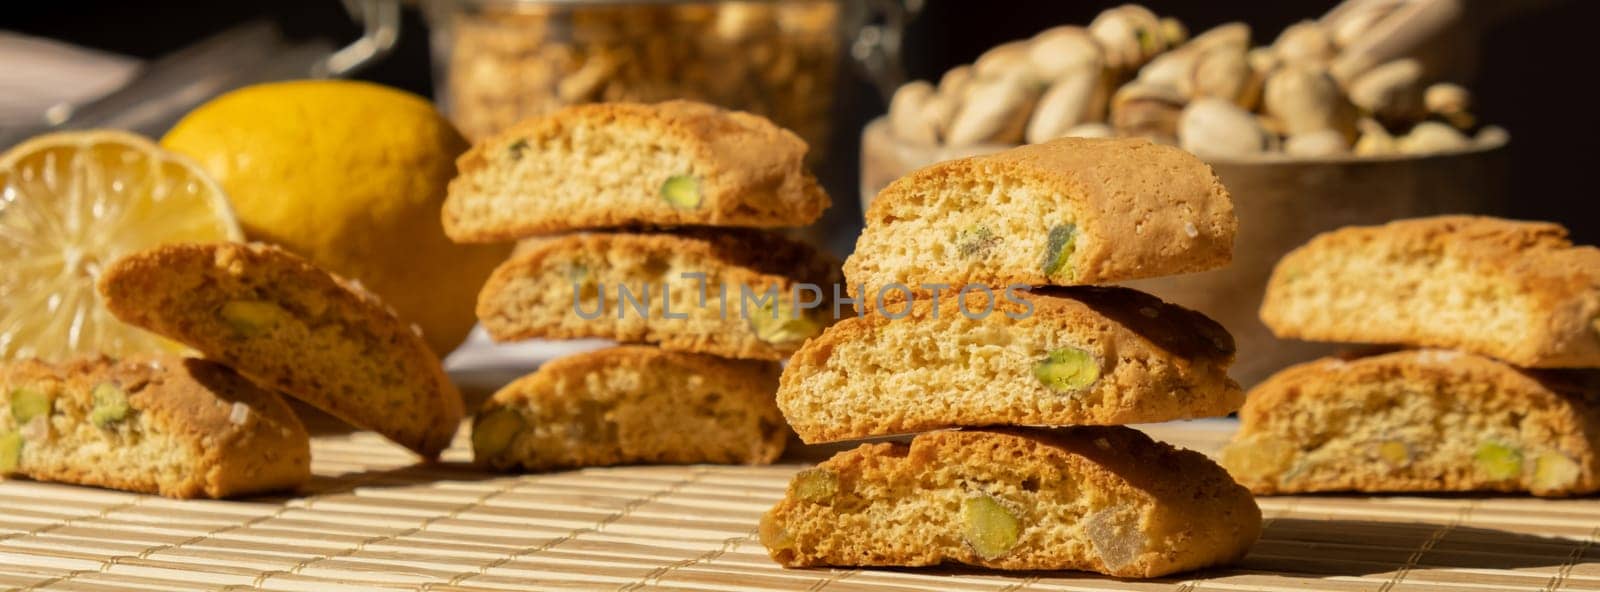 Biscotti Cantuccini Cookie Biscuits with pistachios and lemon peel Shortbread. Healthy eating food. Homemade fresh Italian cookies cantucci stacks and organic pistachios nuts. Vegan dieting vegetarian. Nutrition